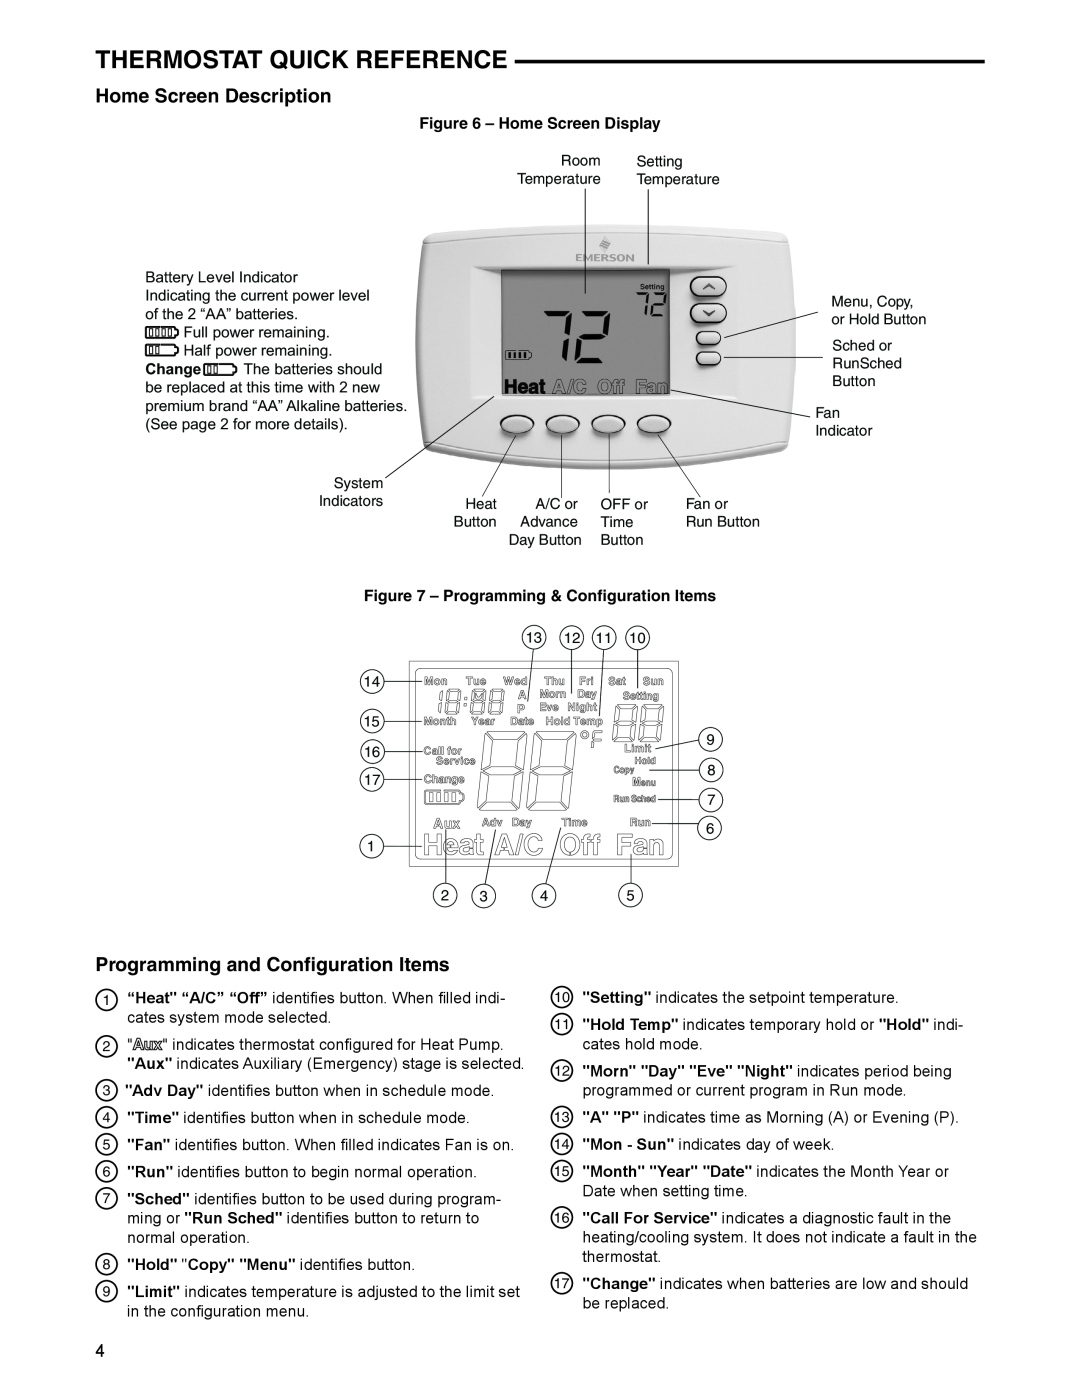 White Rodgers 1F95EZ-0671 Thermostat Quick Reference, Home Screen Description, Programming and Configuration Items 